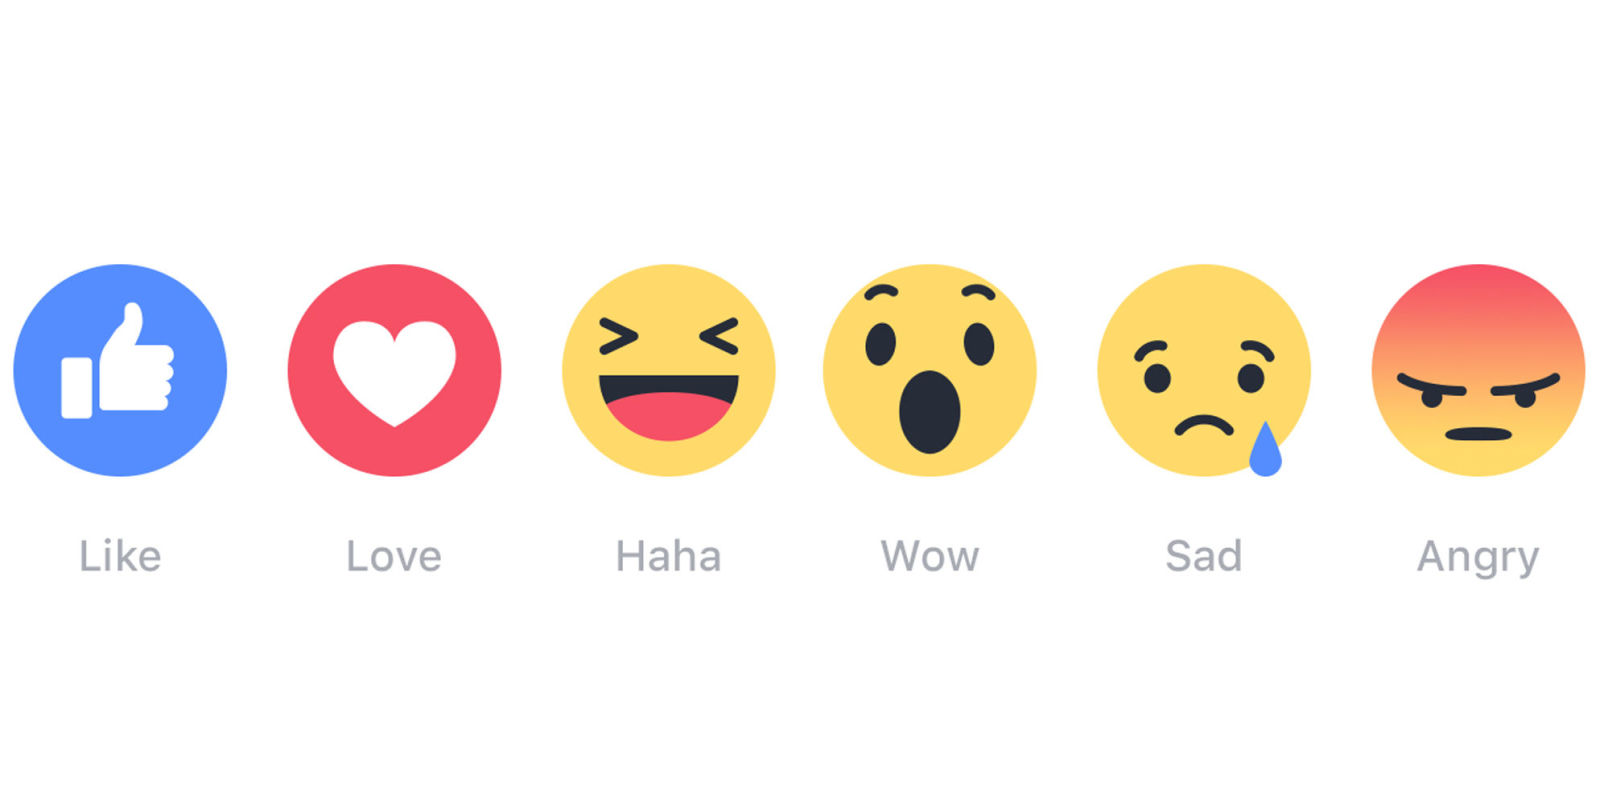 Facebook Reveals New Emoji Reactions For Trump Related Posts